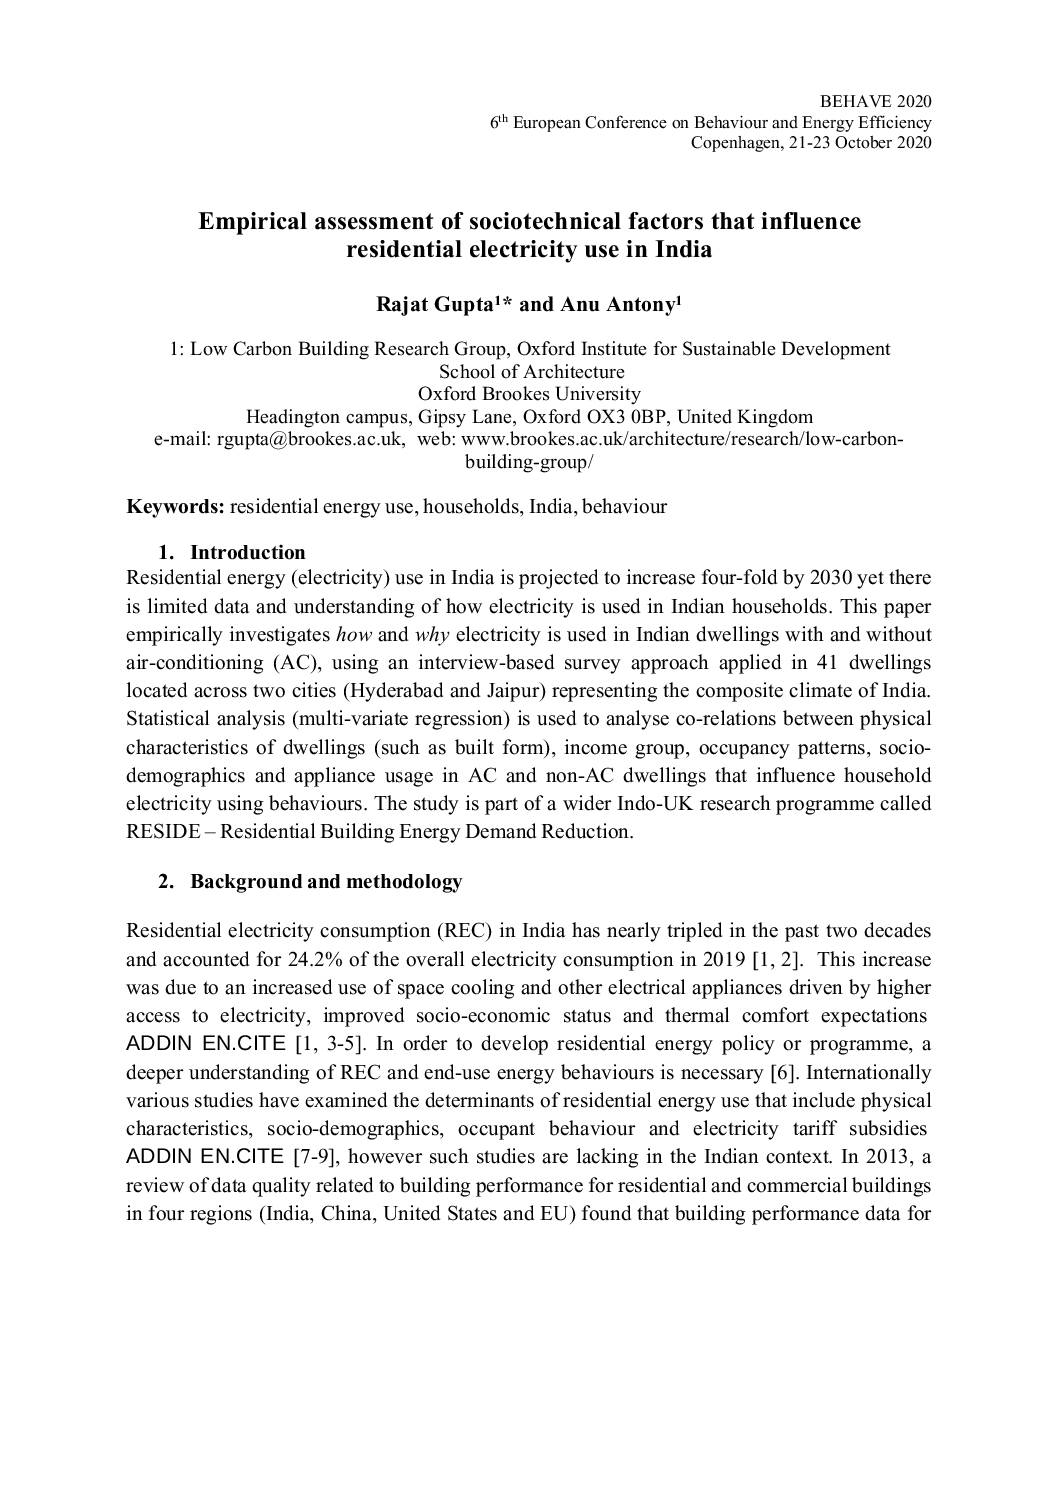 Empirical assessment of socio-technical factors that influence residential electricity use in India